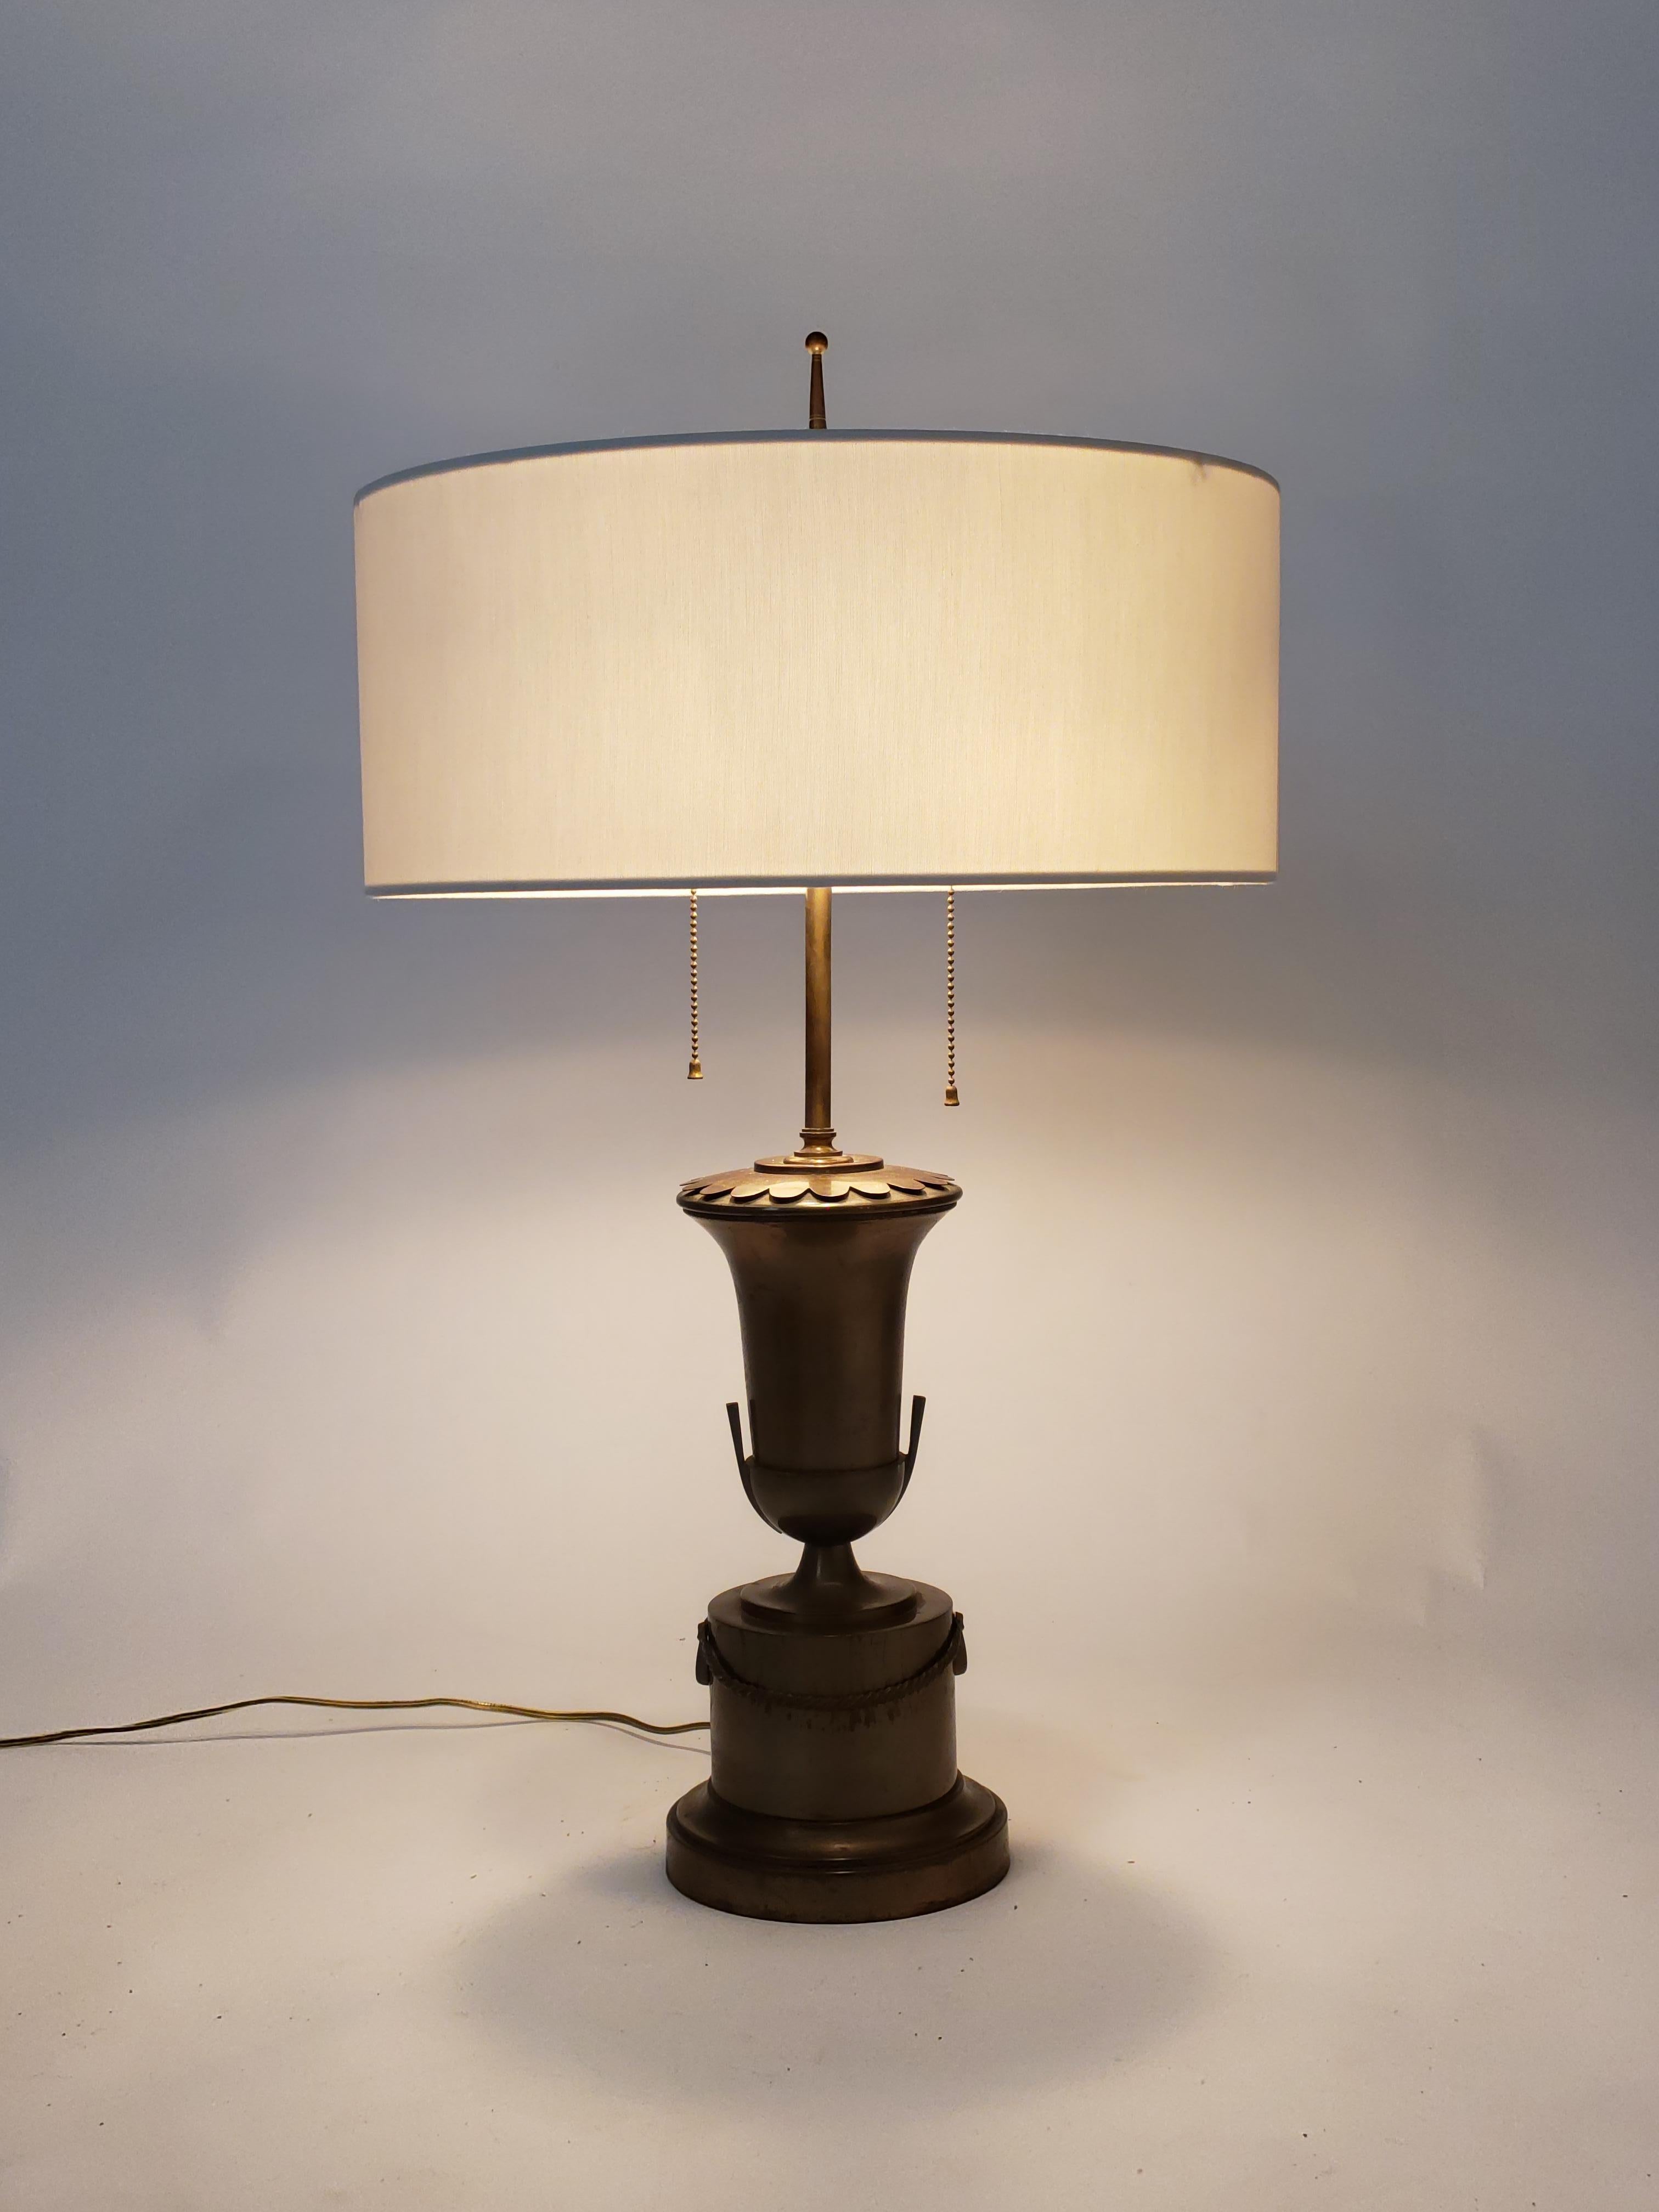 Prime quality Italian brass table lamp with a strong patina. 

Well made solid construction. 

2 pull chain socket E26 size rated at 60 watt each. 

Shade is for display only.  

